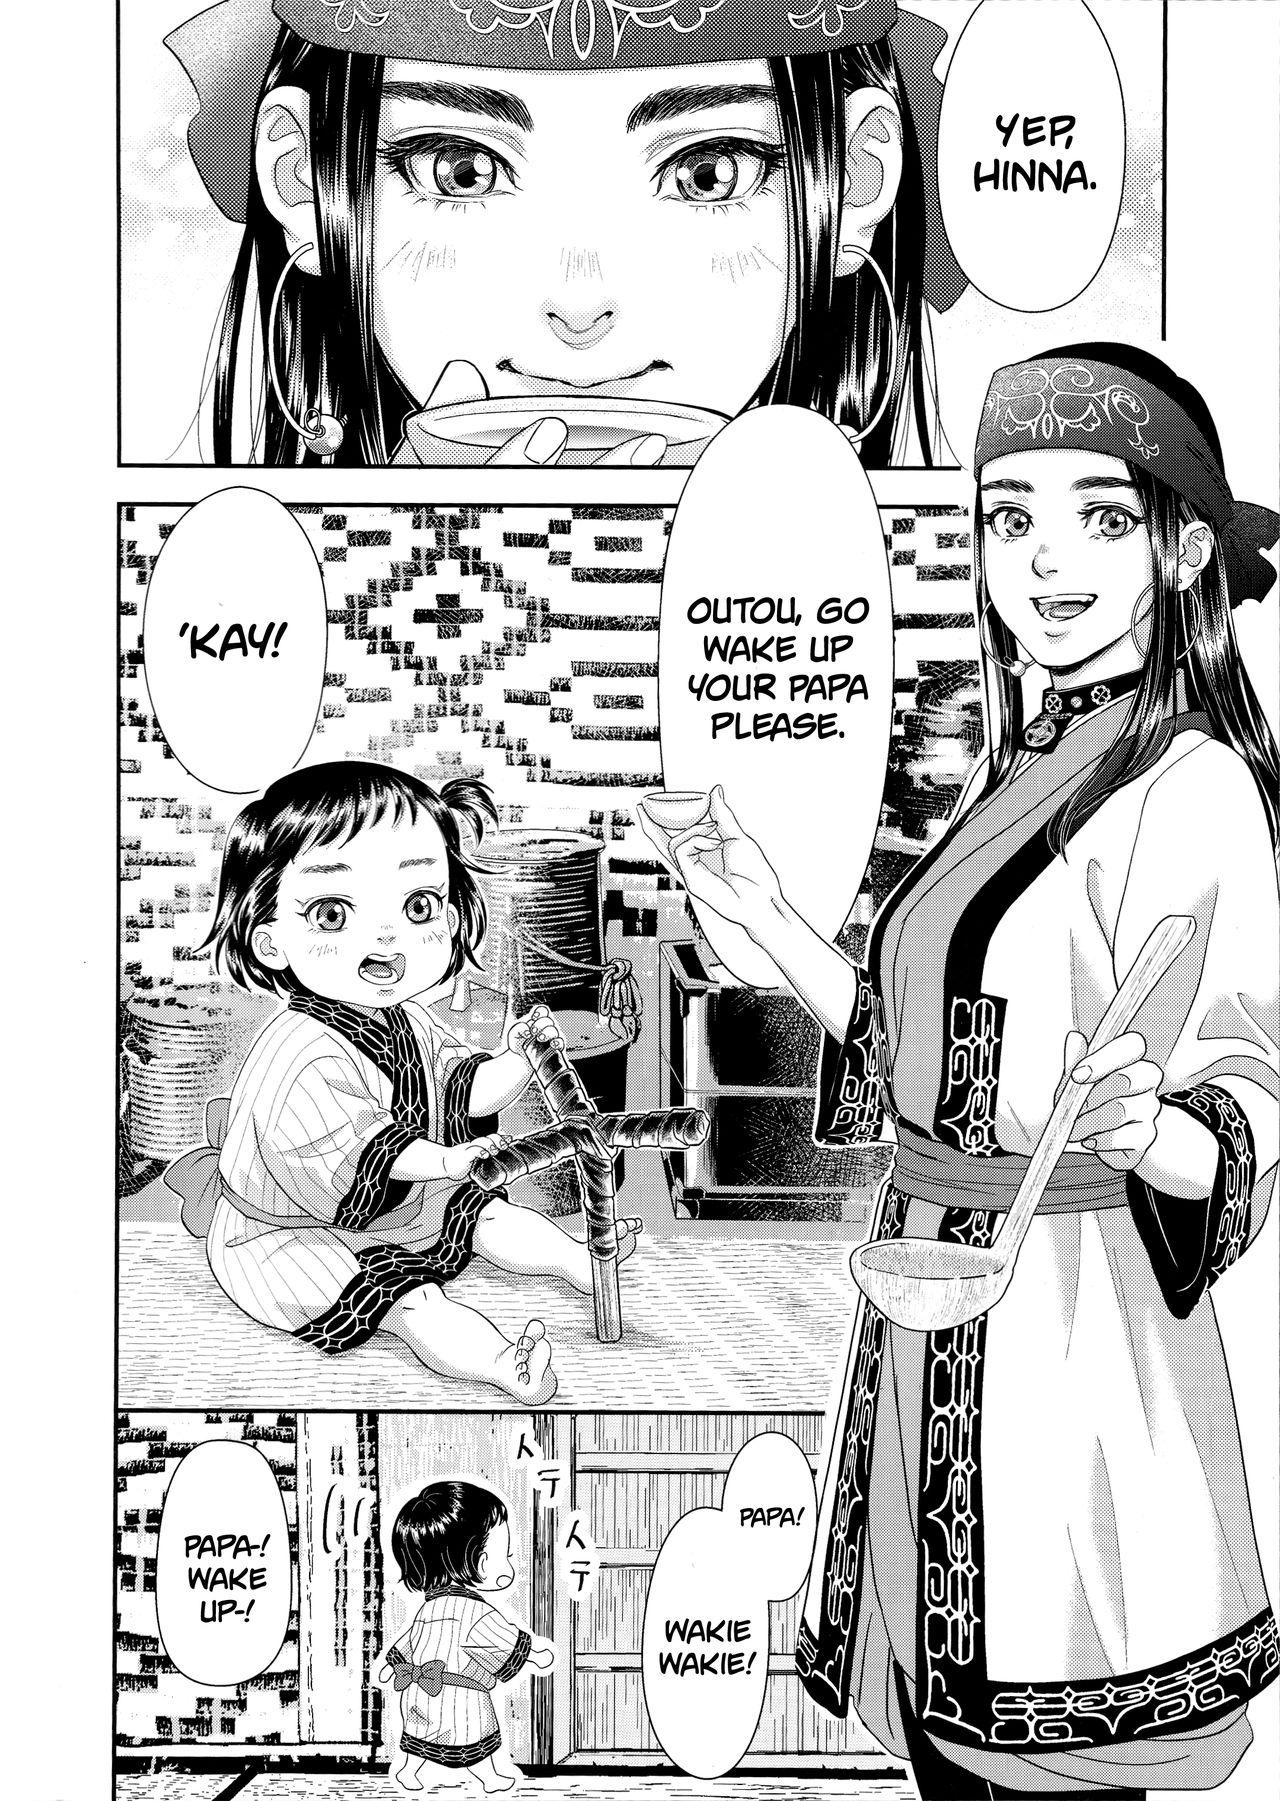 Couch Sugimoto Ikka/Sugimoto's Household - Golden kamuy Music - Page 4